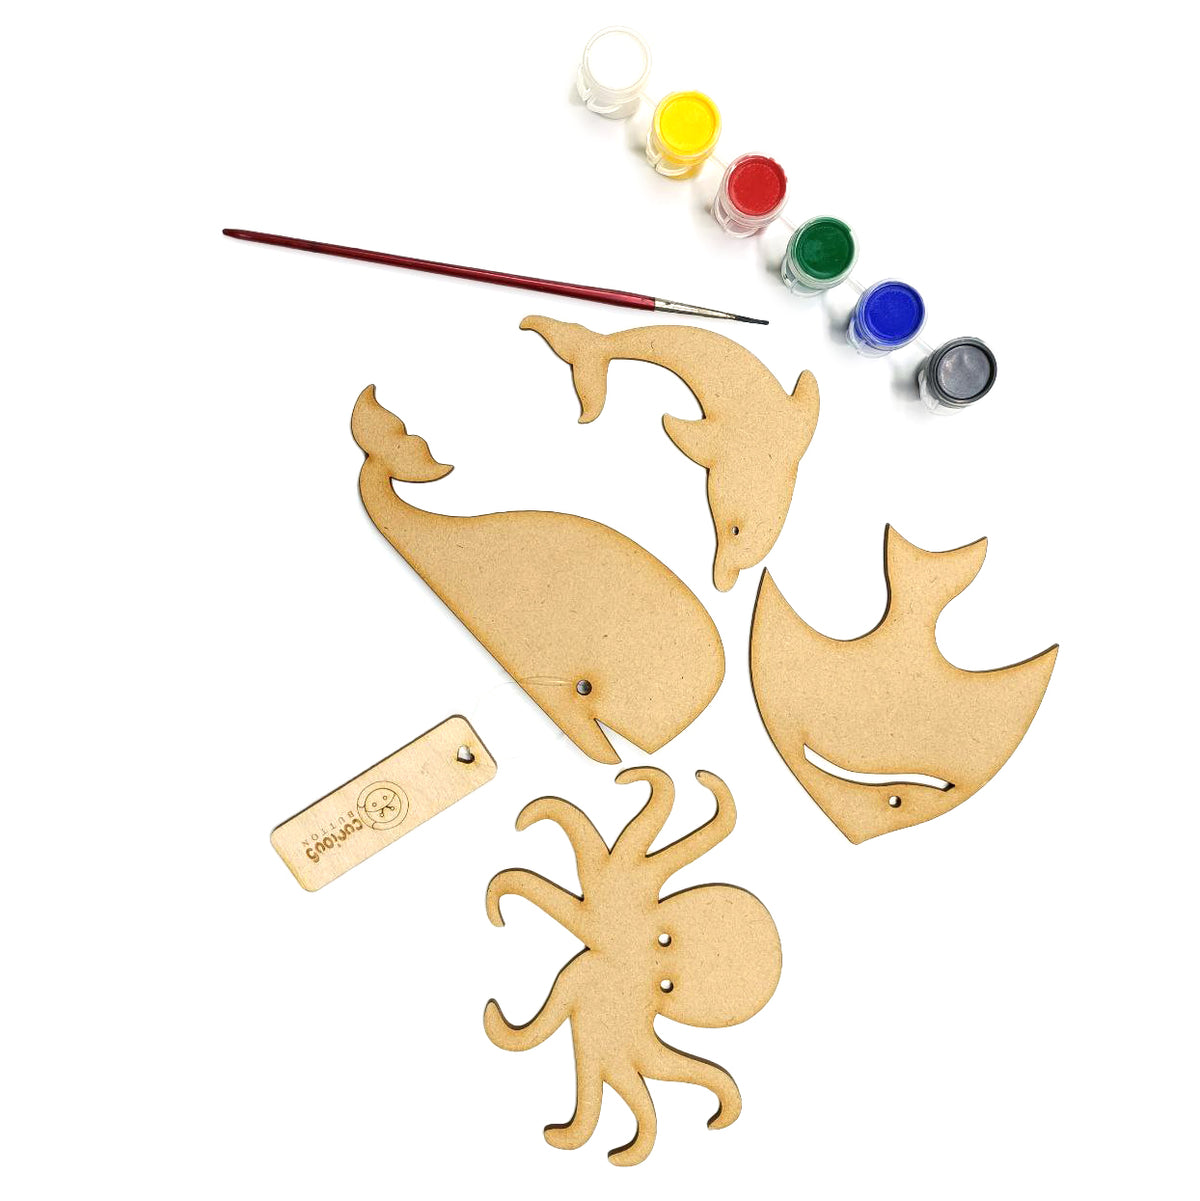 Sea creature colouring kit includes water colours and brush - Haoser